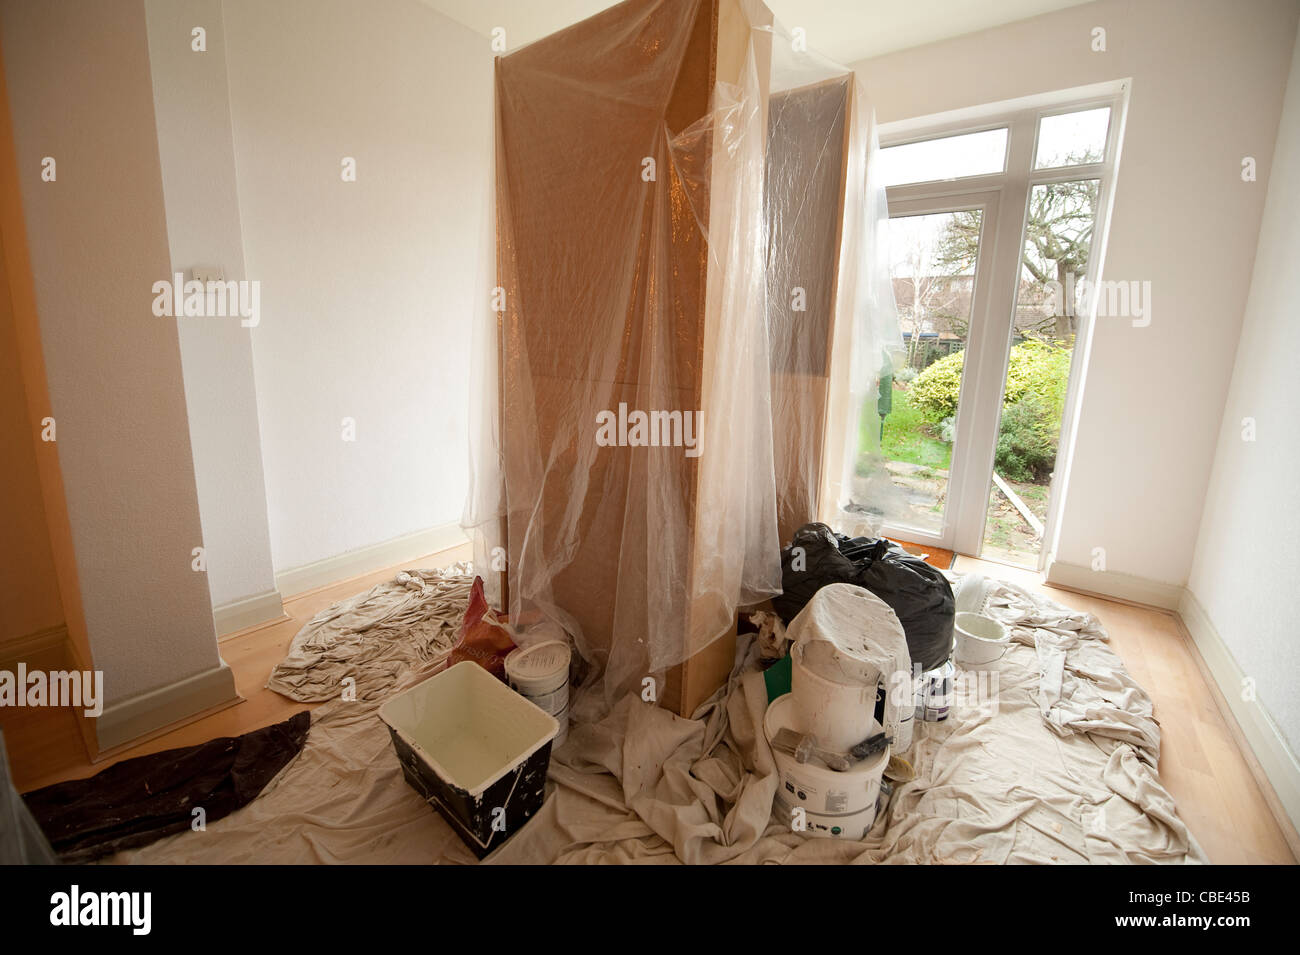 Internal room of a house being redecorated Stock Photo - Alamy